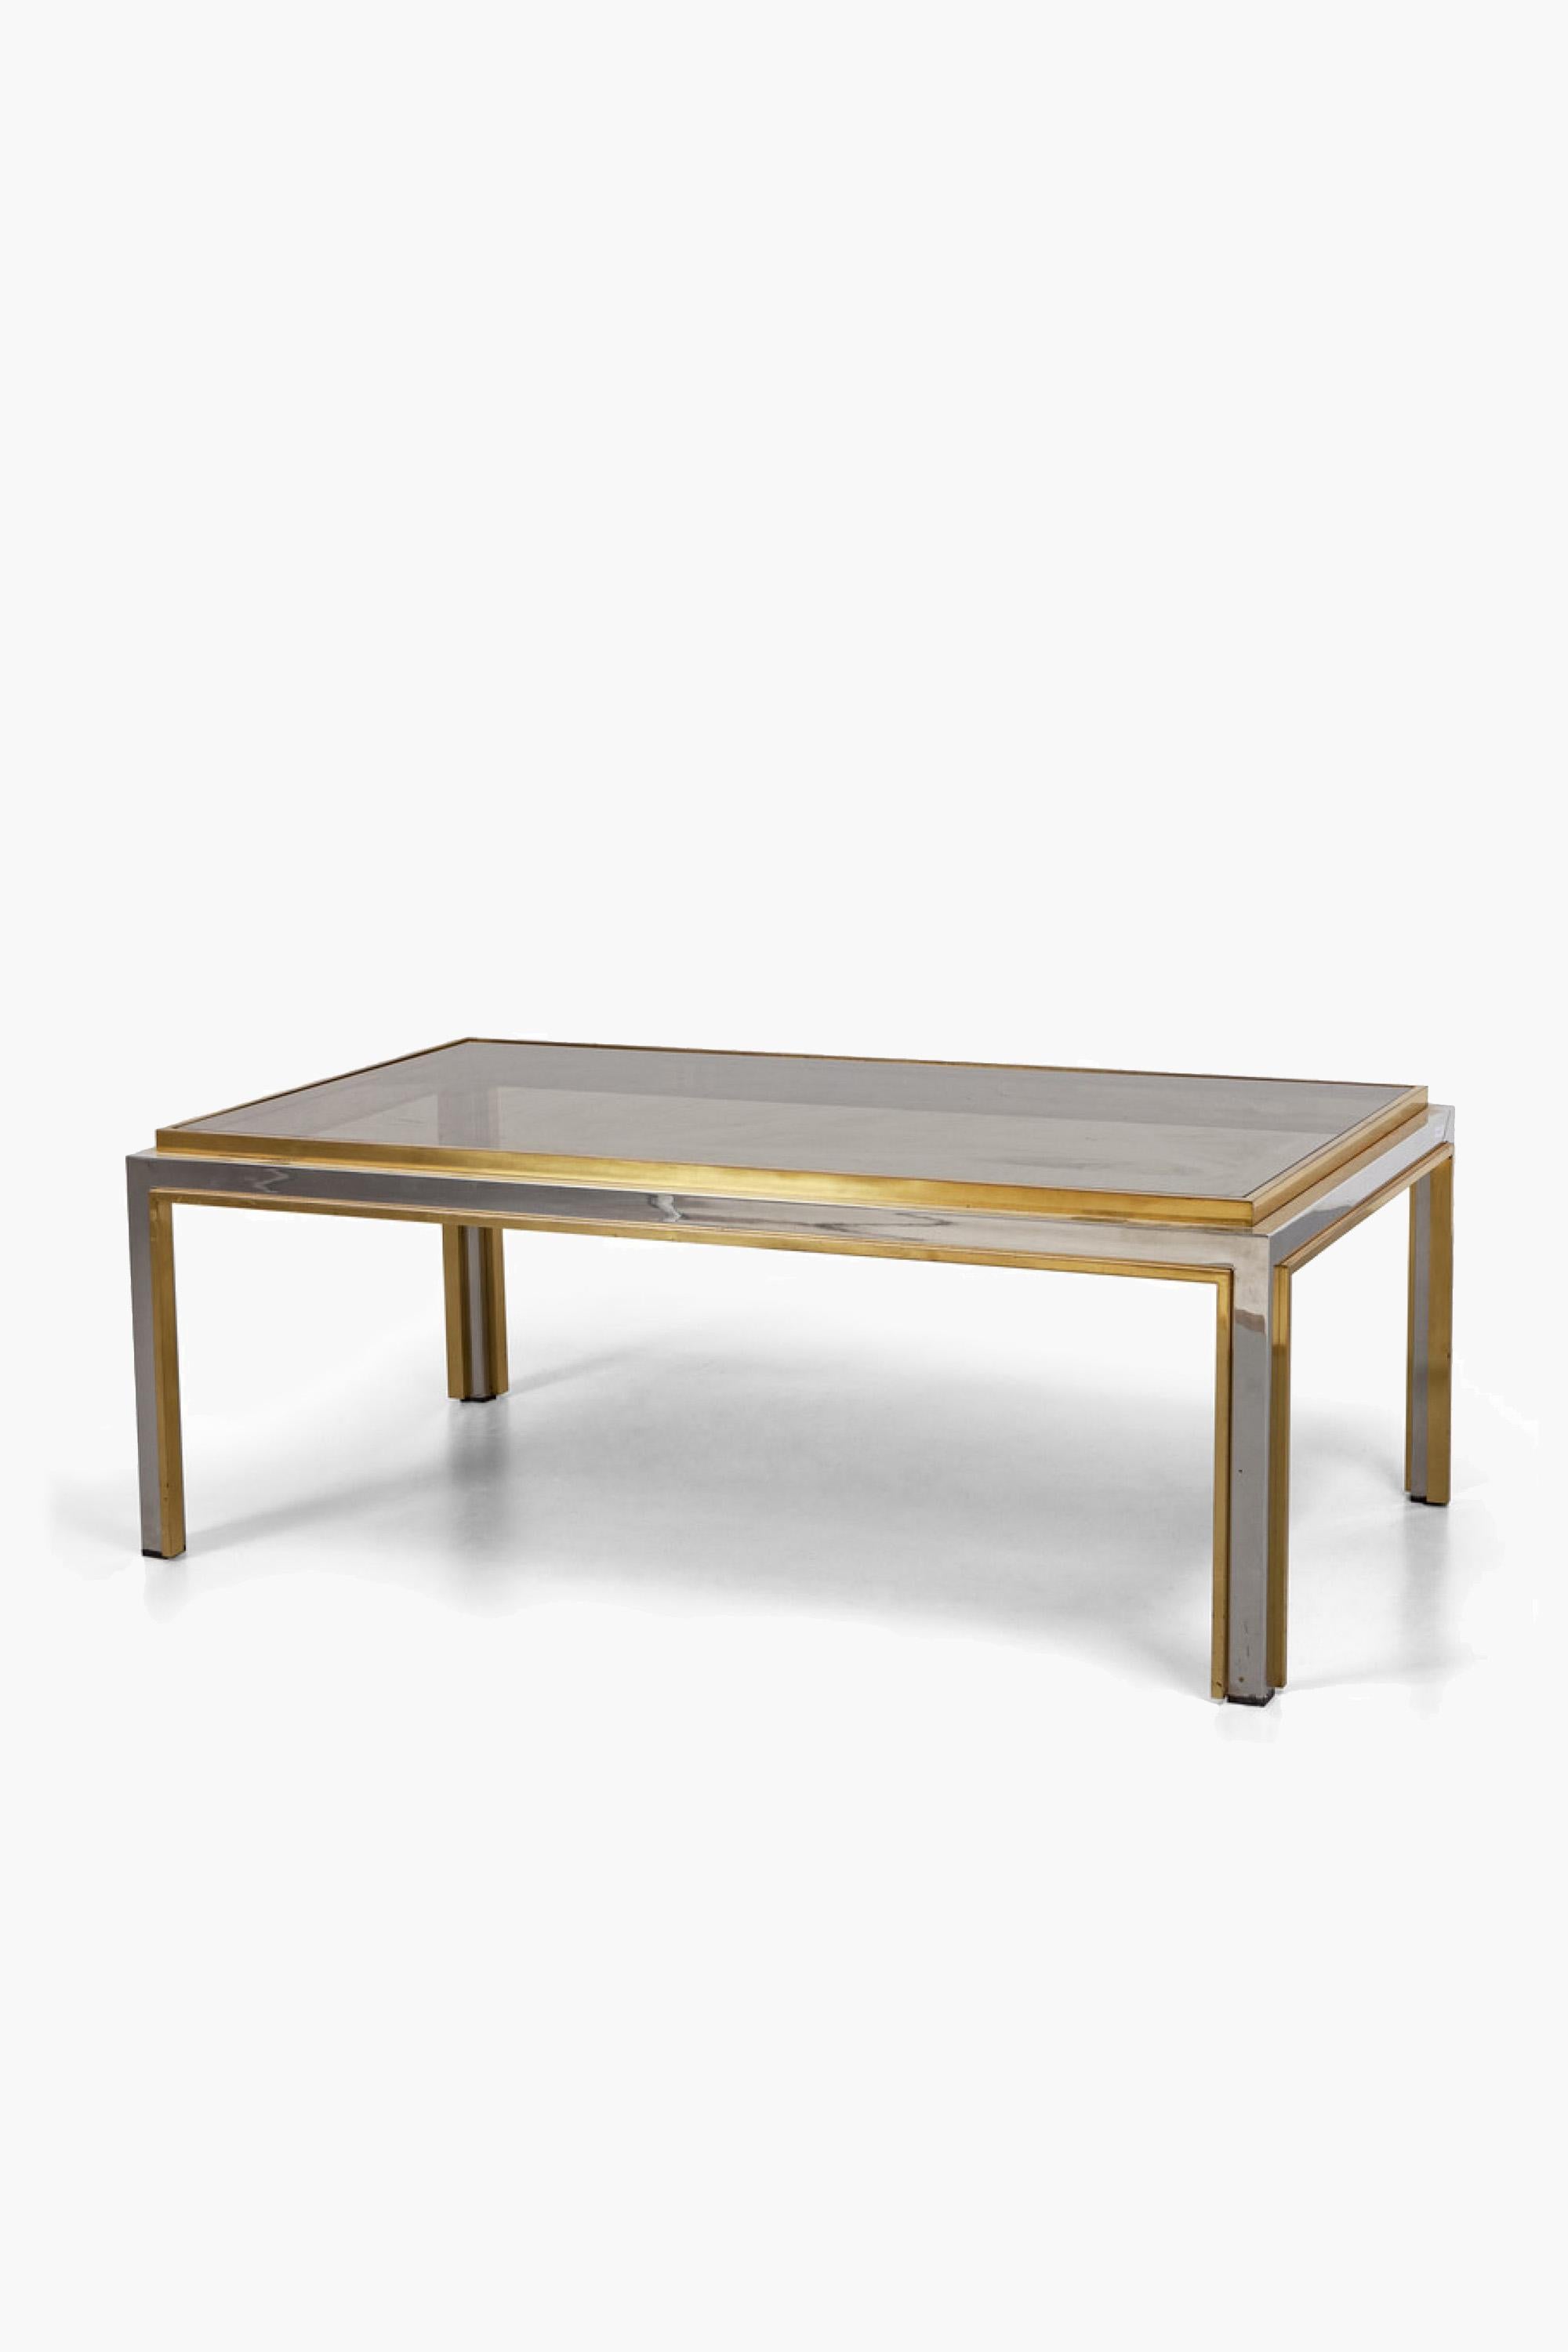 20th Century Chrome and Brass Coffee Table by Romeo Rega, 1970s For Sale